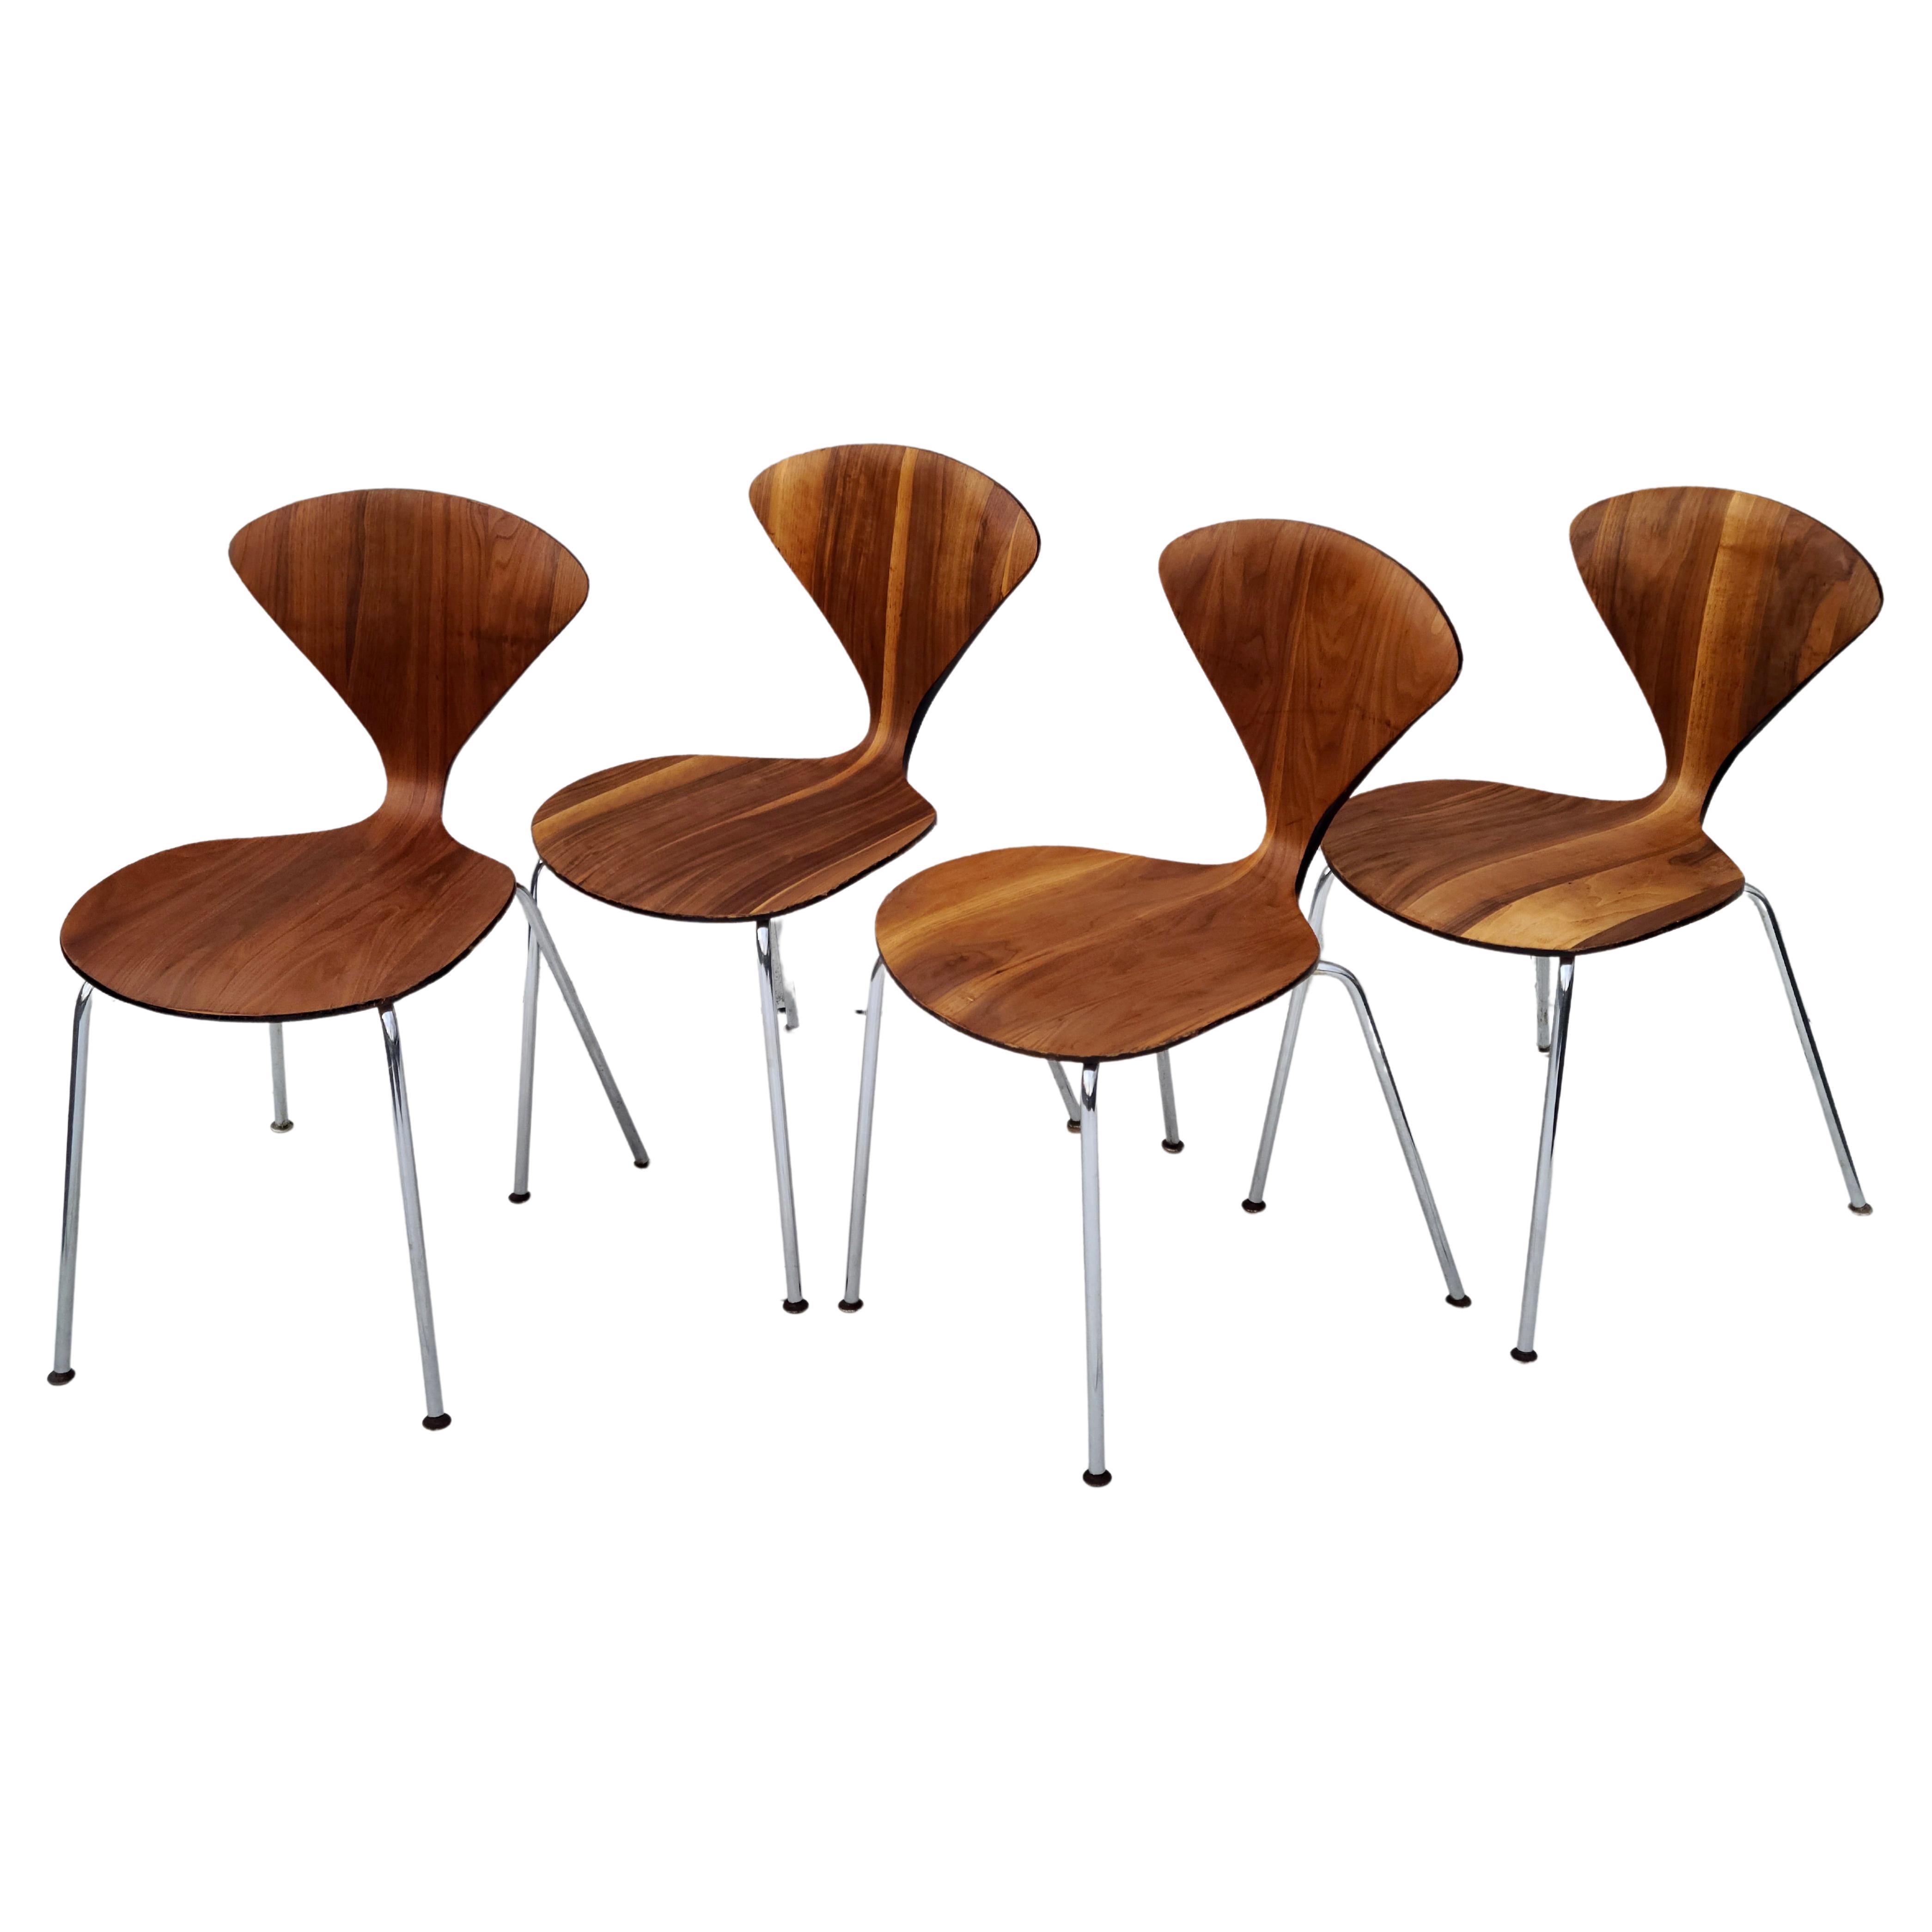 Set of 4 Norman Cherner Directional Side Chairs Plycraft In Good Condition For Sale In Fraser, MI